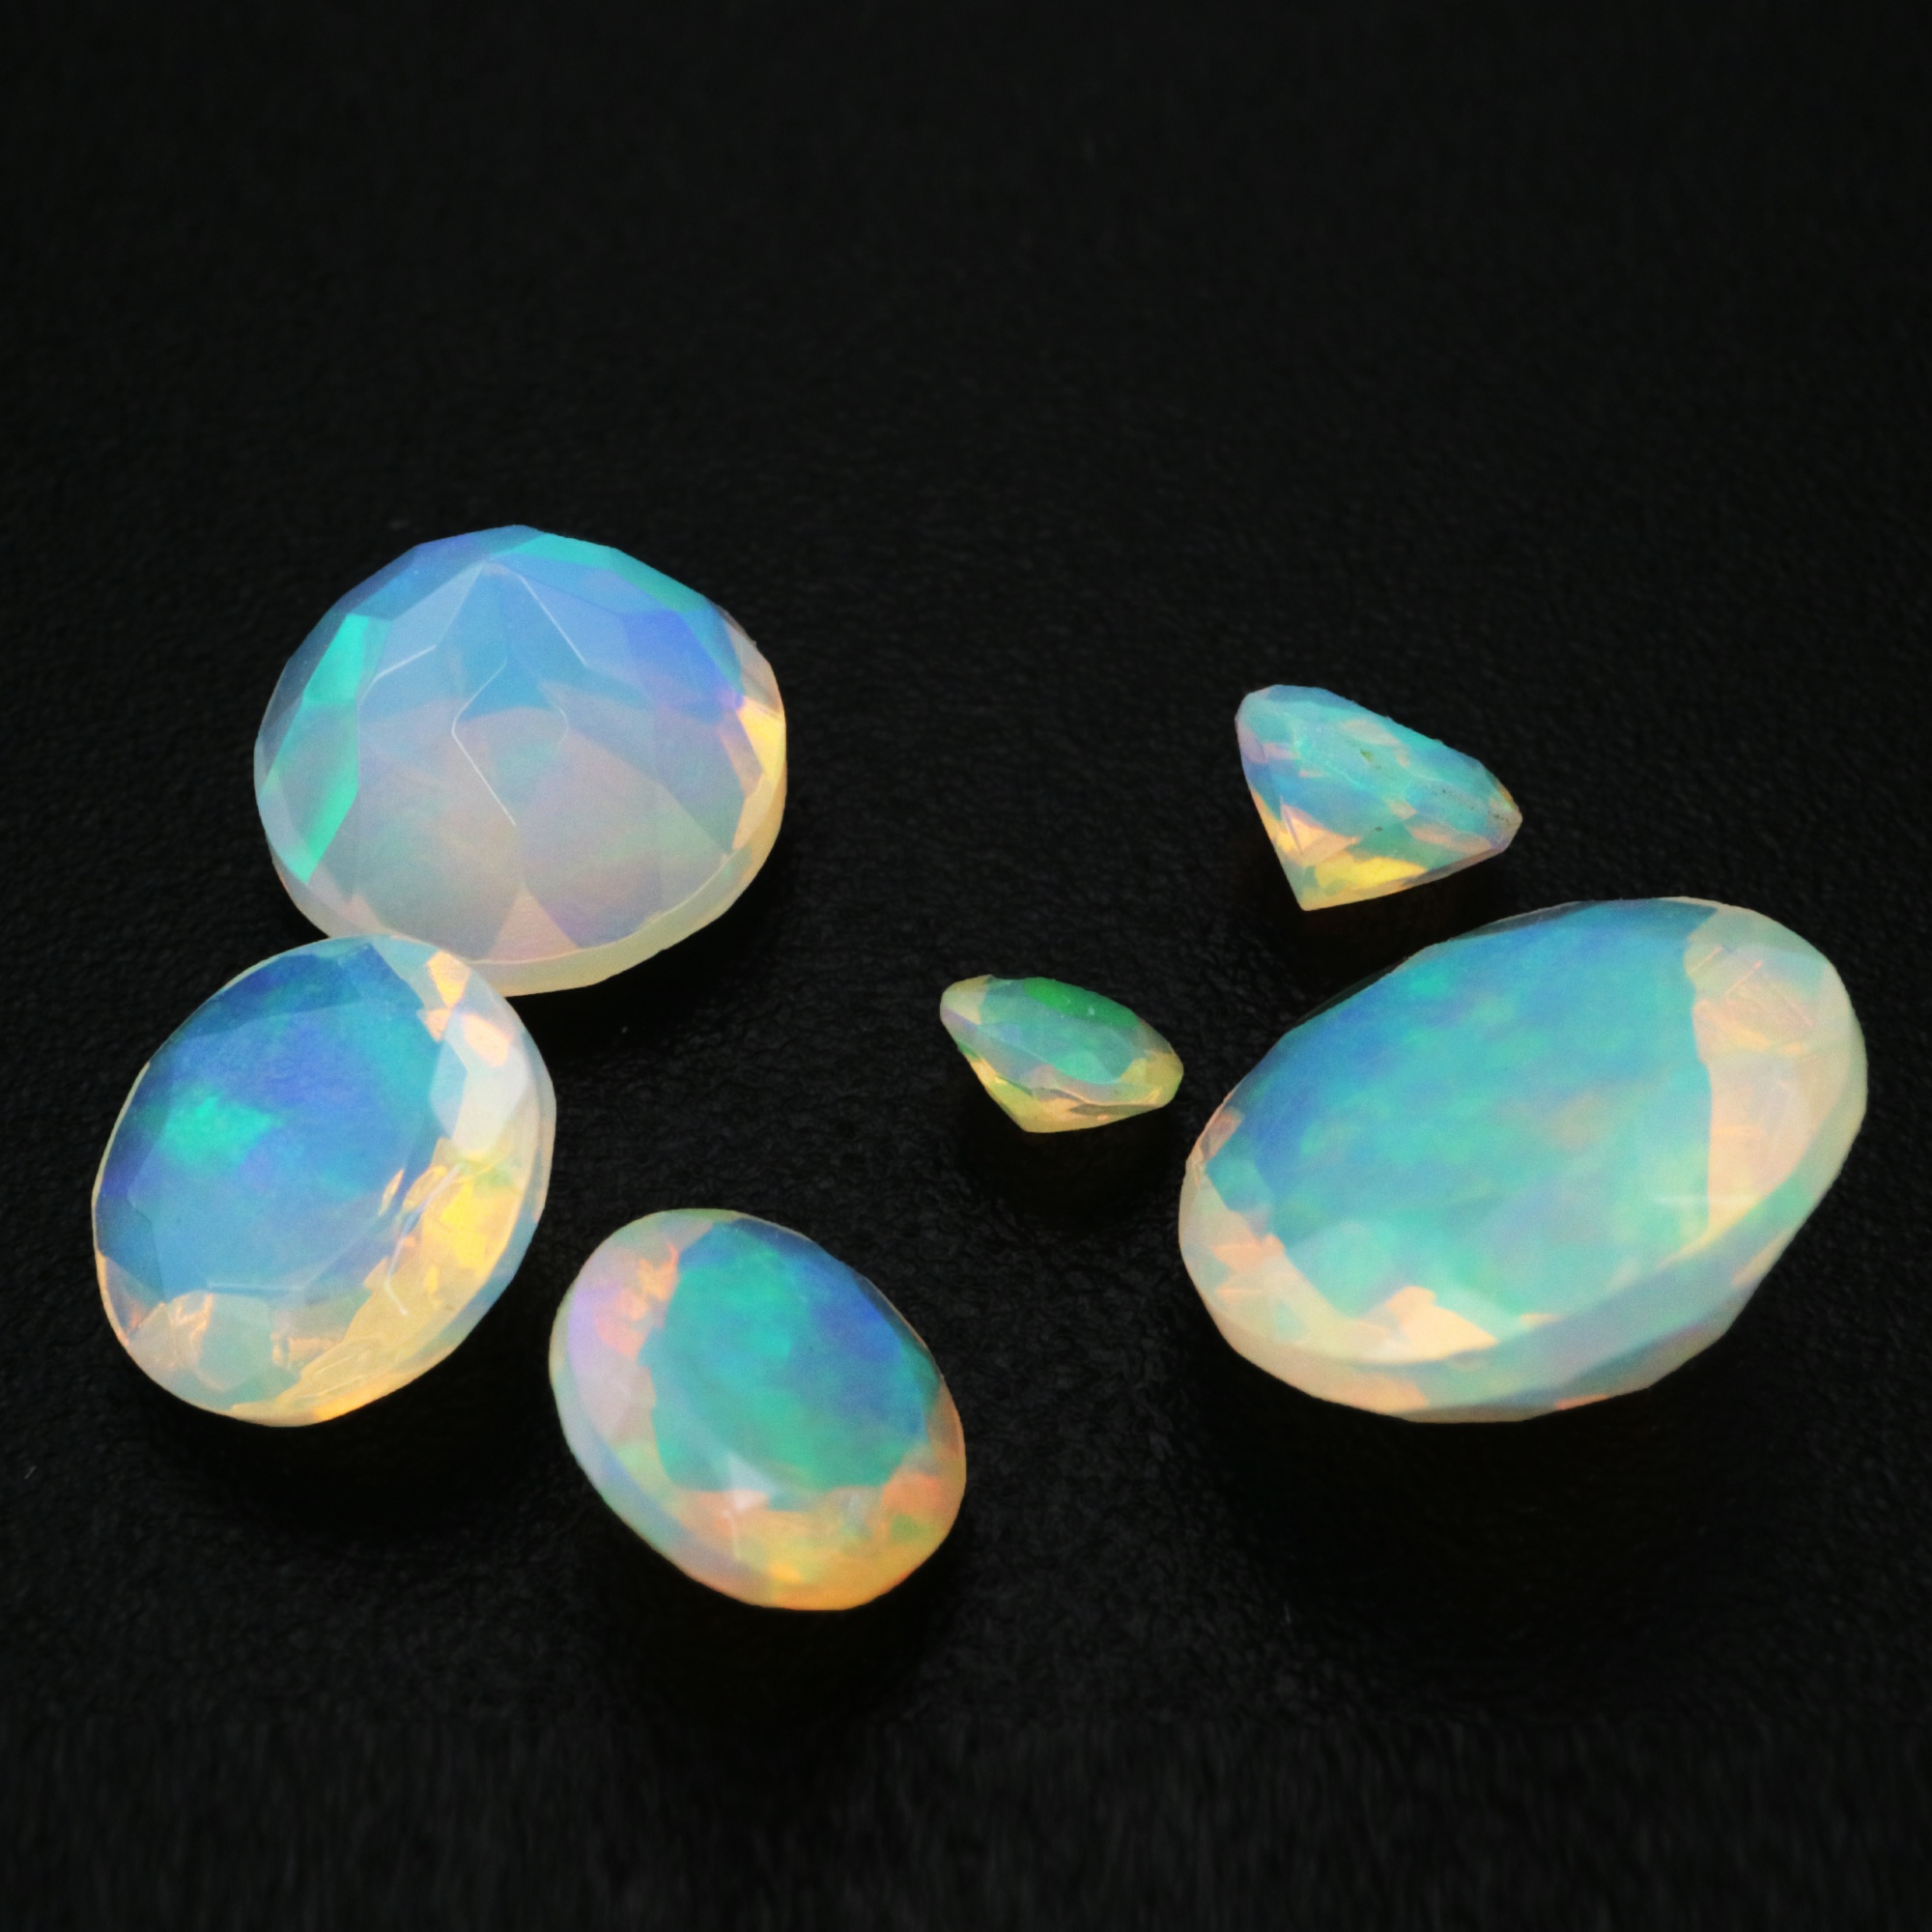 1Pcs Round Africa Opal October Birthstone Color Changing Faceted Cut AAA Grade Loose Gemstone Natural Semi Precious Stone DIY Jewelry Supplies 4110175 - Click Image to Close